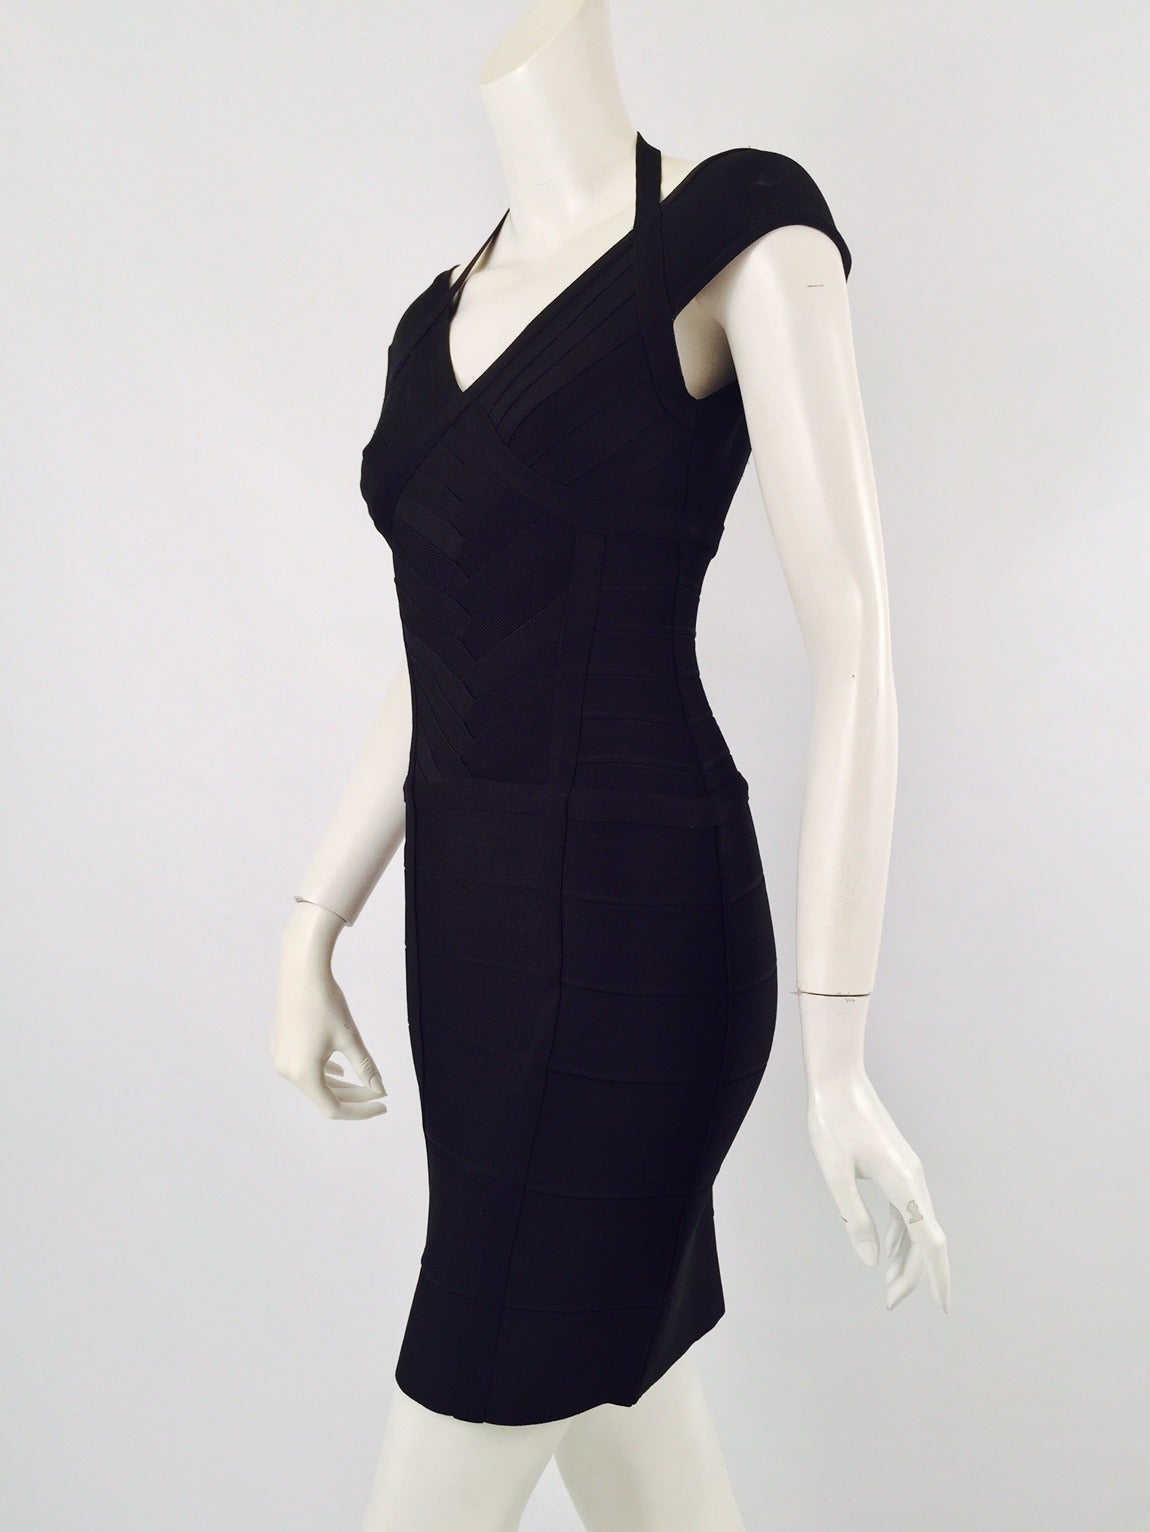 Herve Leger Iconic Black Badage Dress illustrates what made Herve Leger a famous designer in the 1980's. Body conscious? Yes! Unforgettable 